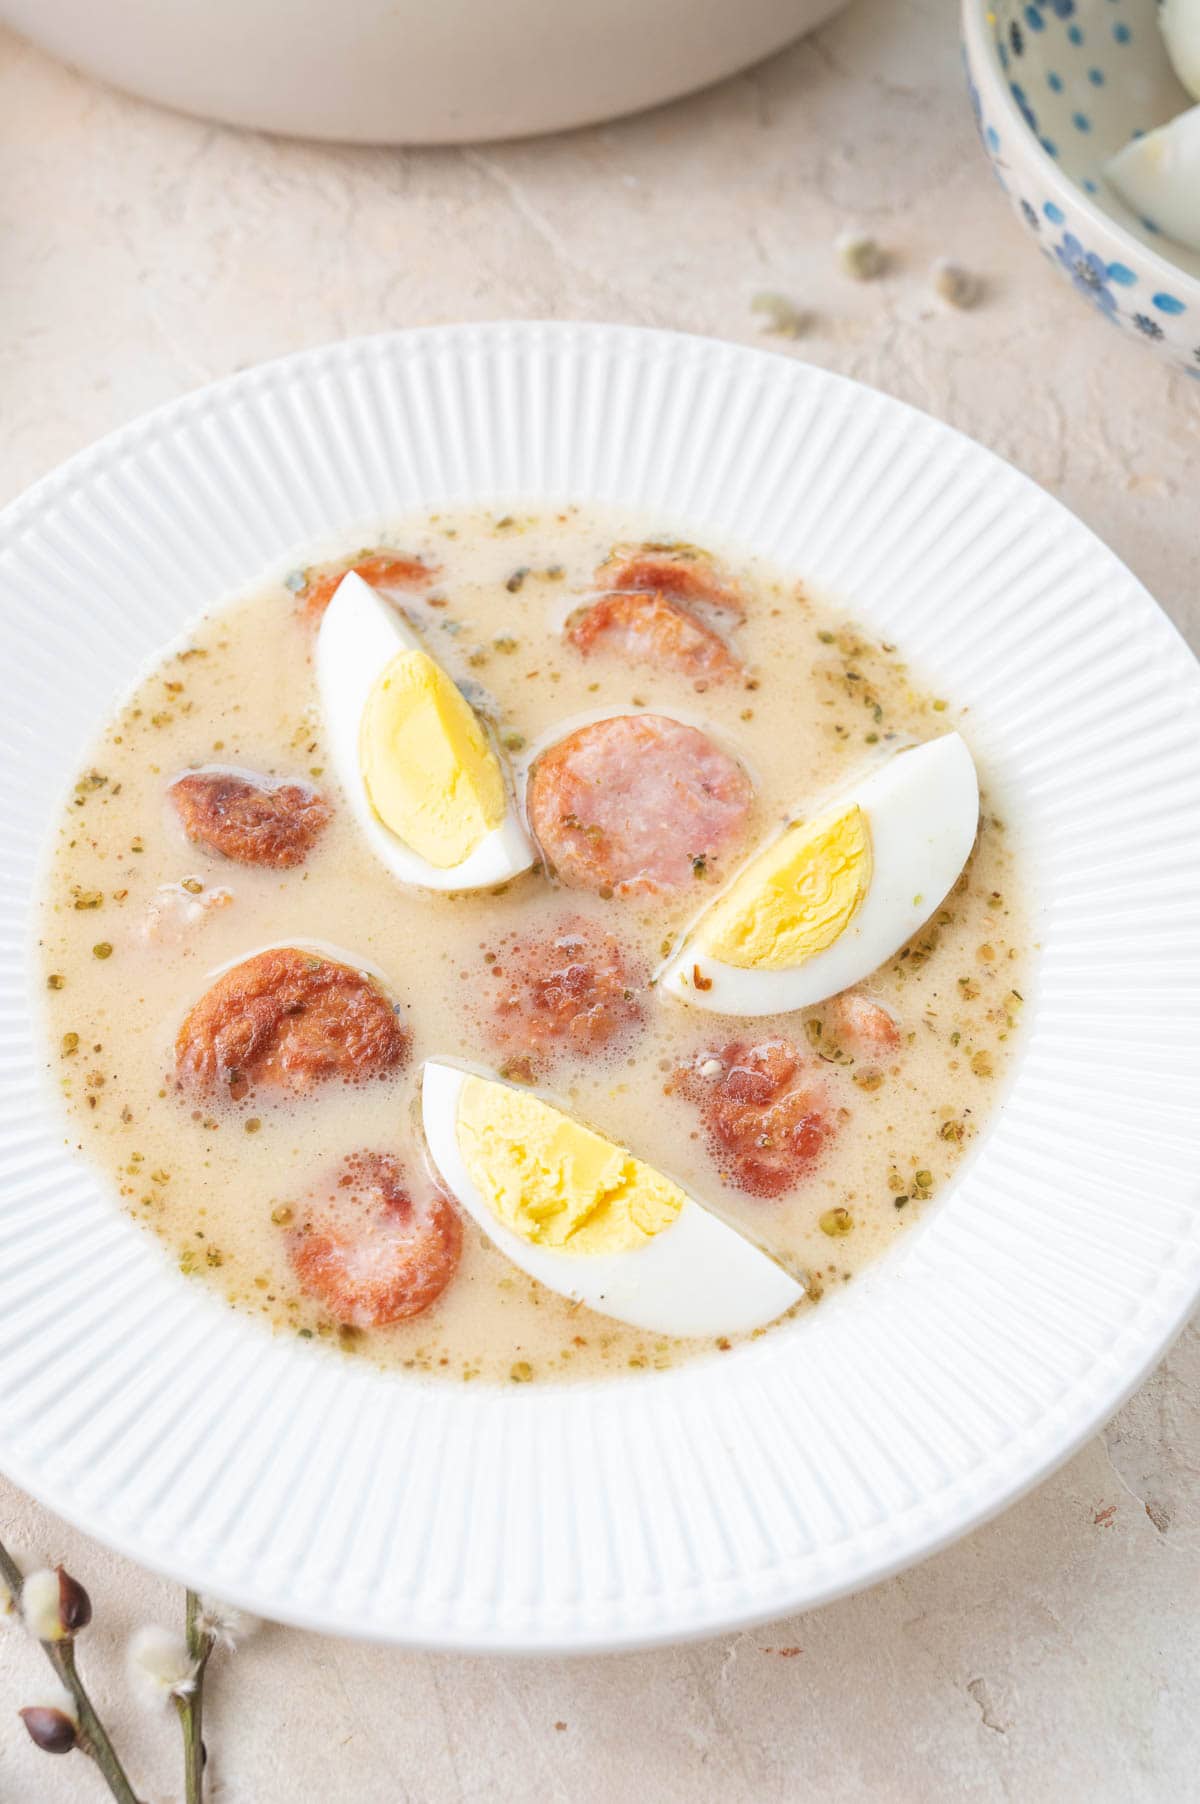 White borscht with sausage and eggs in a white bowl.